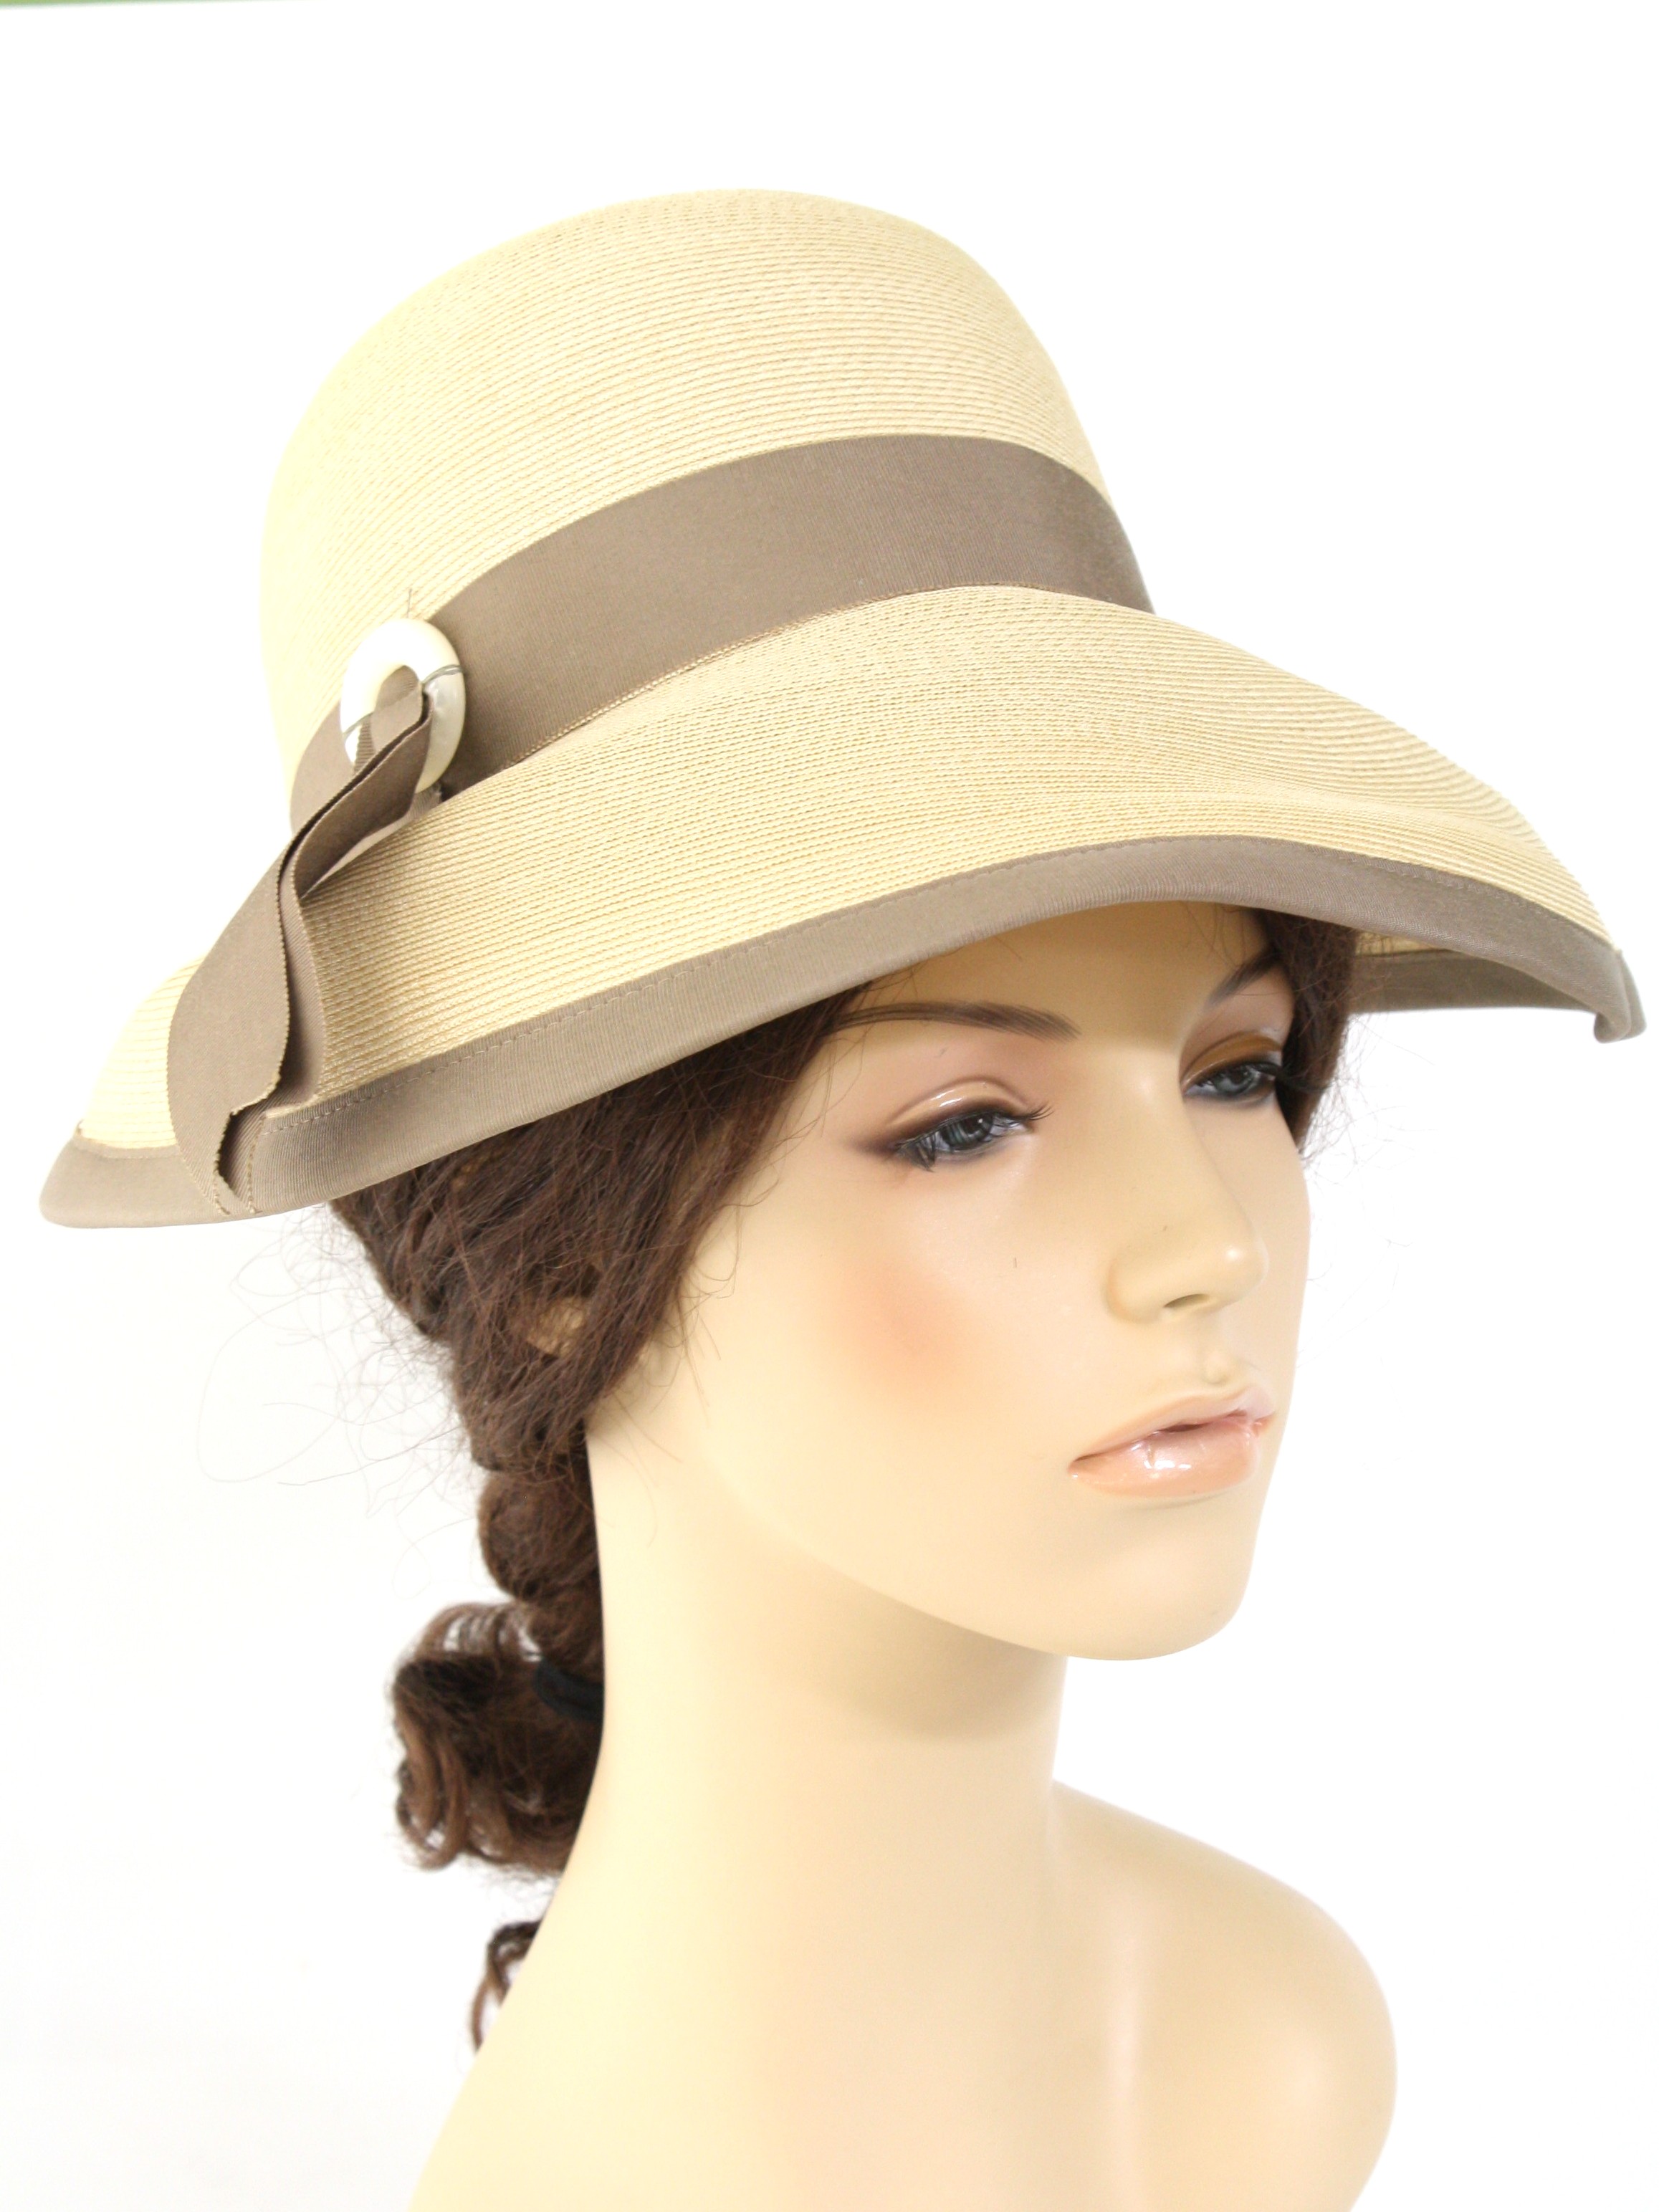 Sears Fashion Millinery 50's Vintage Hat: 50s -Sears Fashion Millinery ...